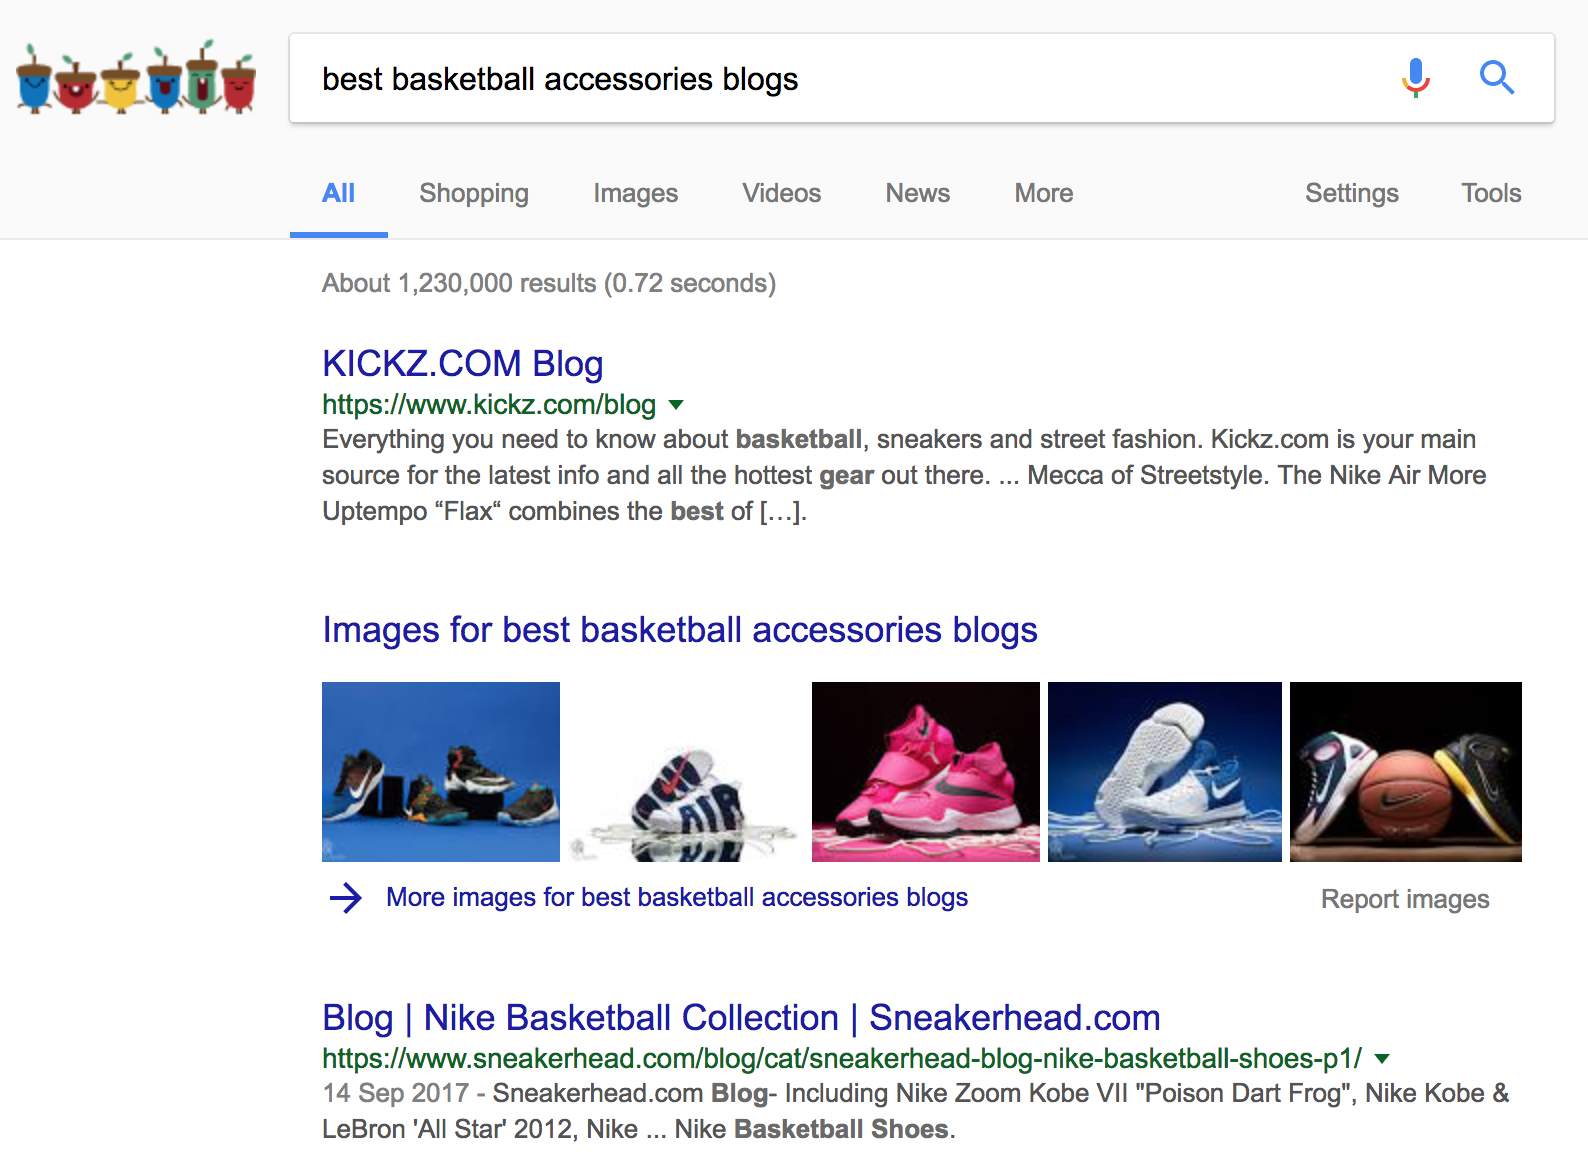 Screenshot showing a google search for "best basketball accessories blogs"